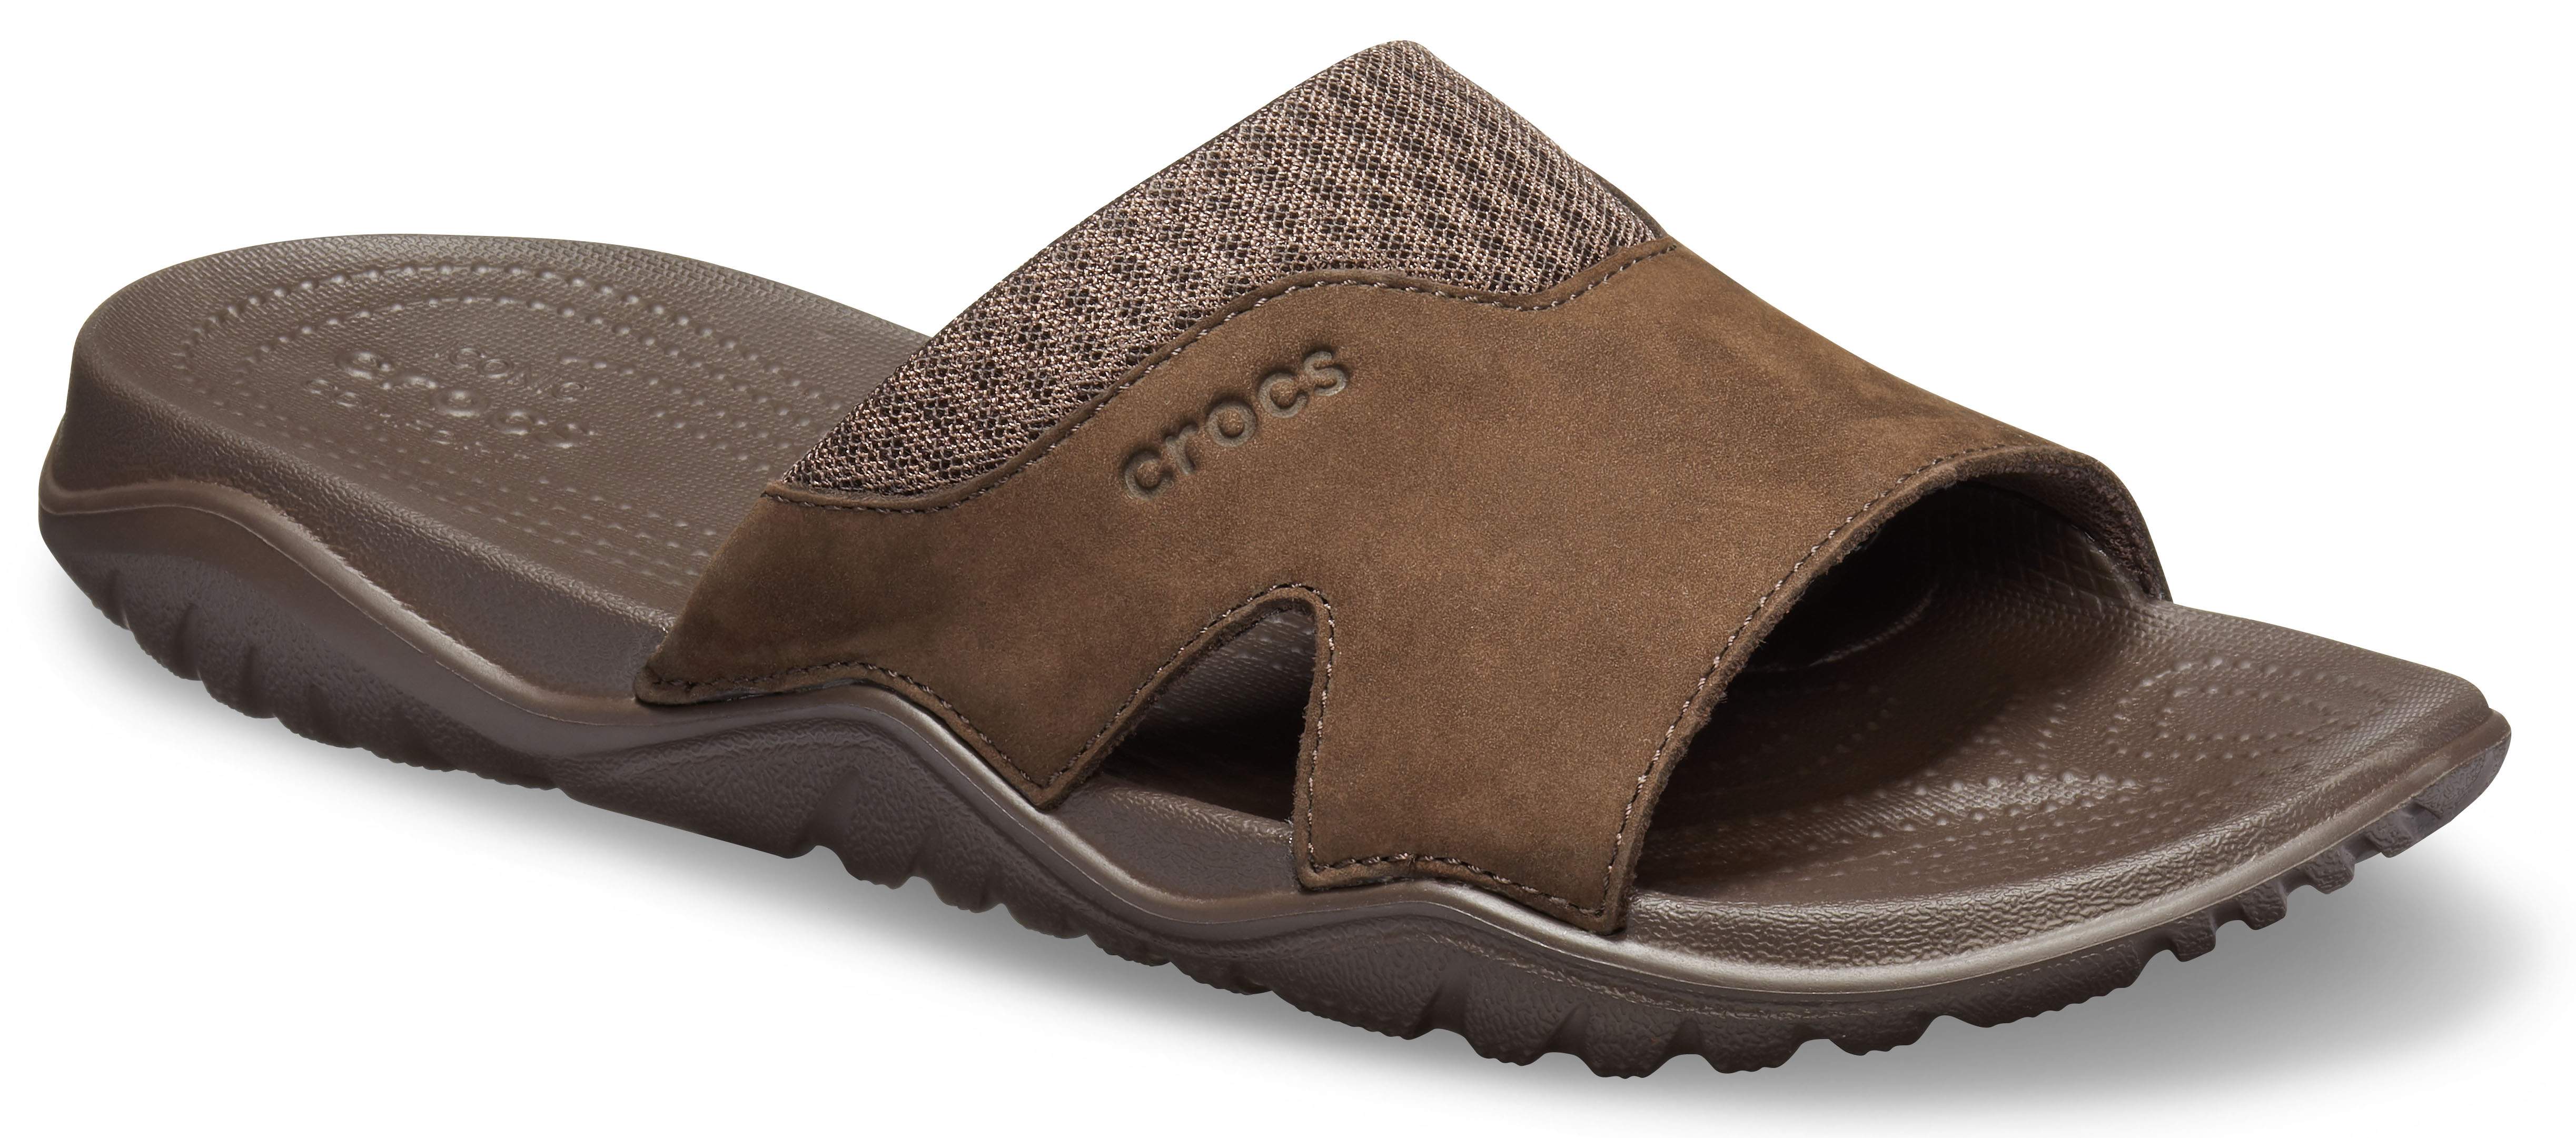 crocs men's swiftwater leather clog